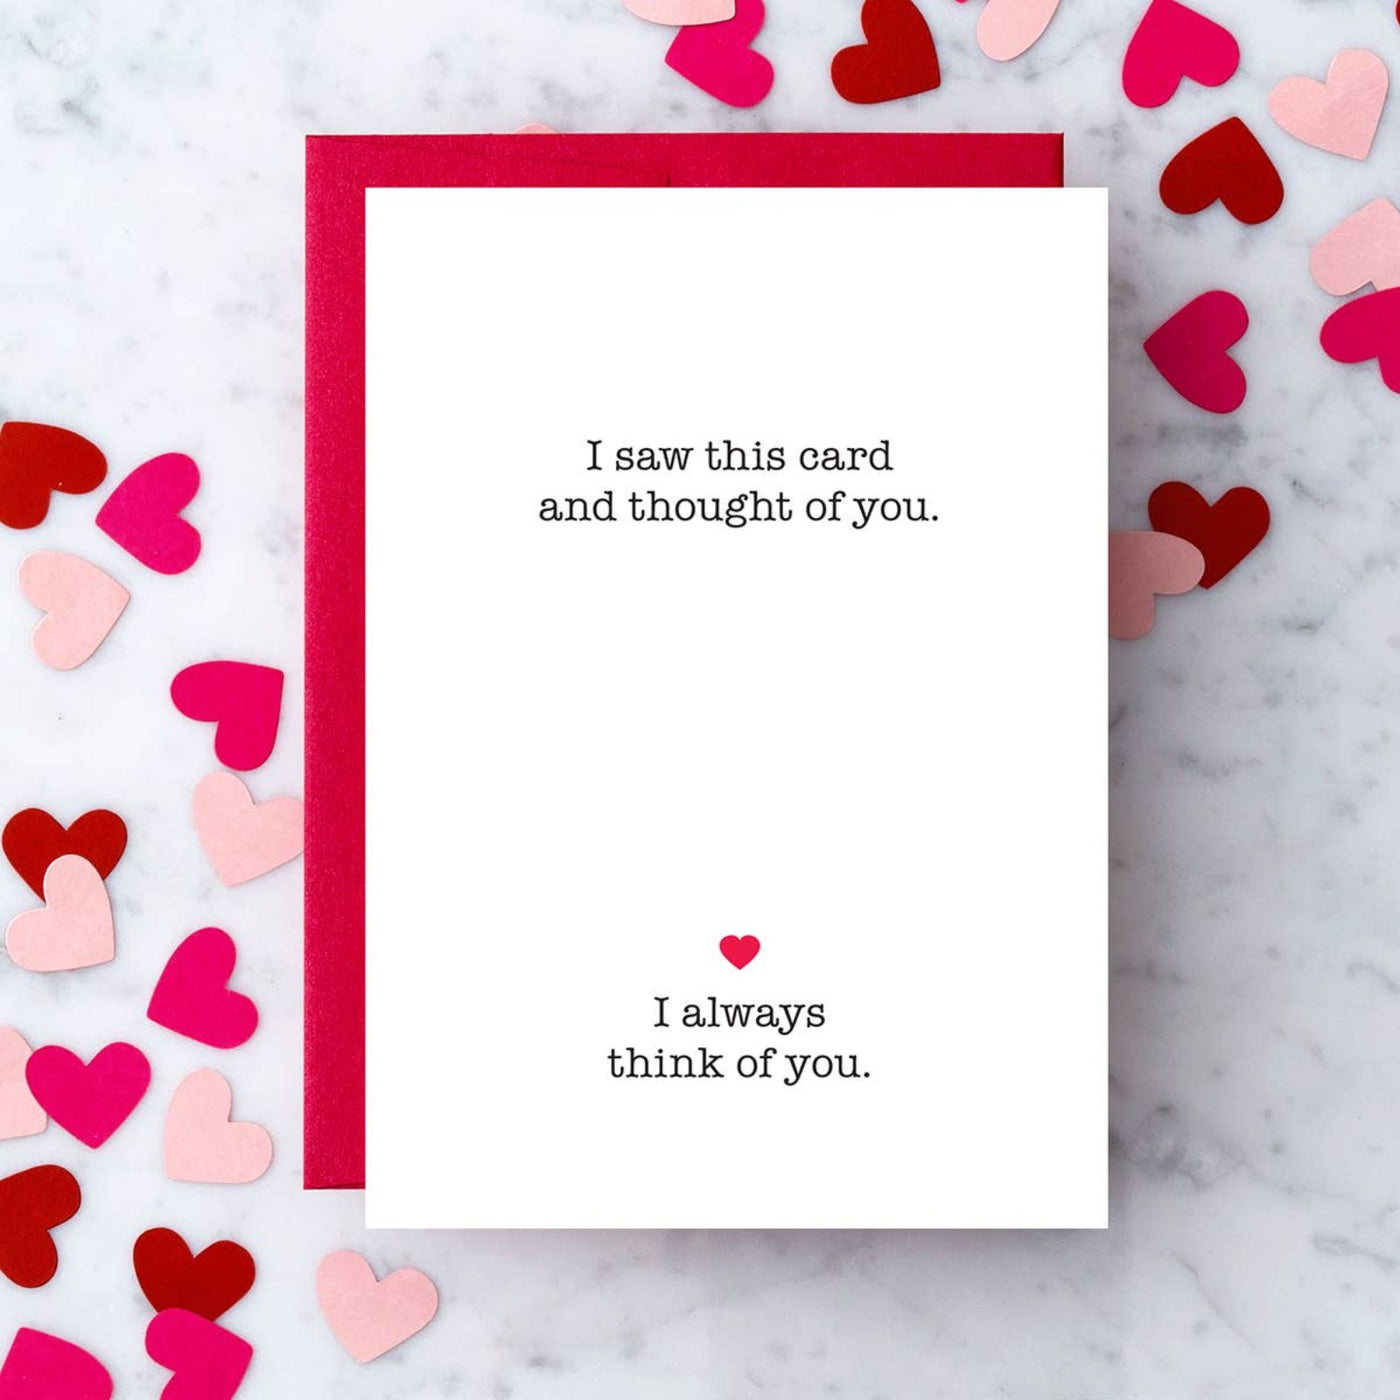 I Saw This Card and Thought of You Greeting Card